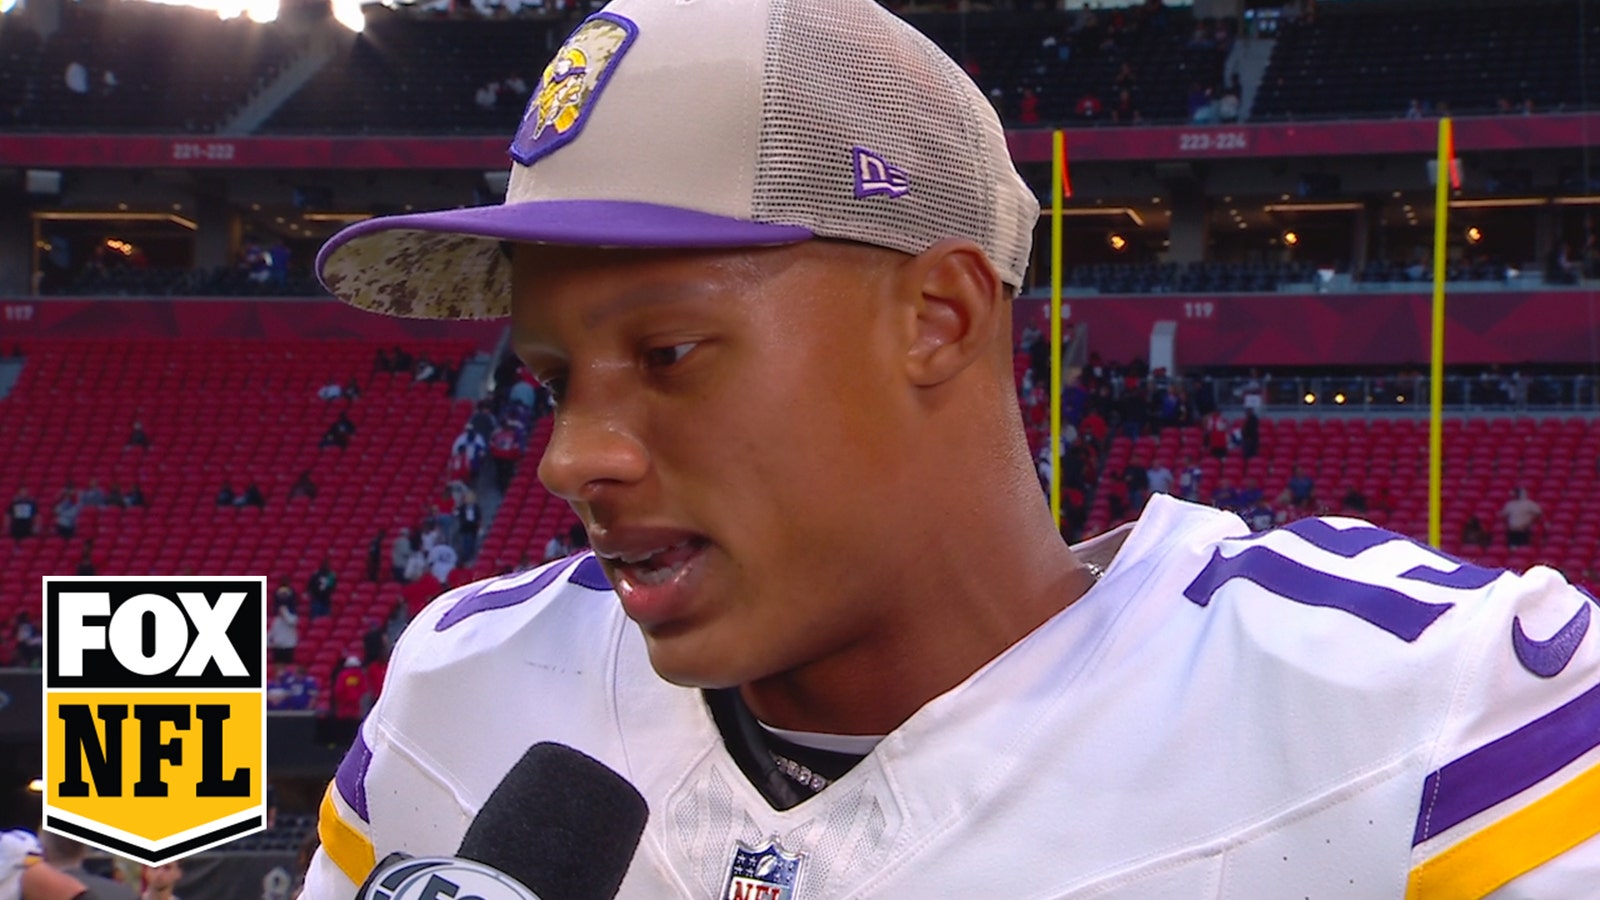 Josh Dobbs reflects on being traded to the Vikings, leading them to a win